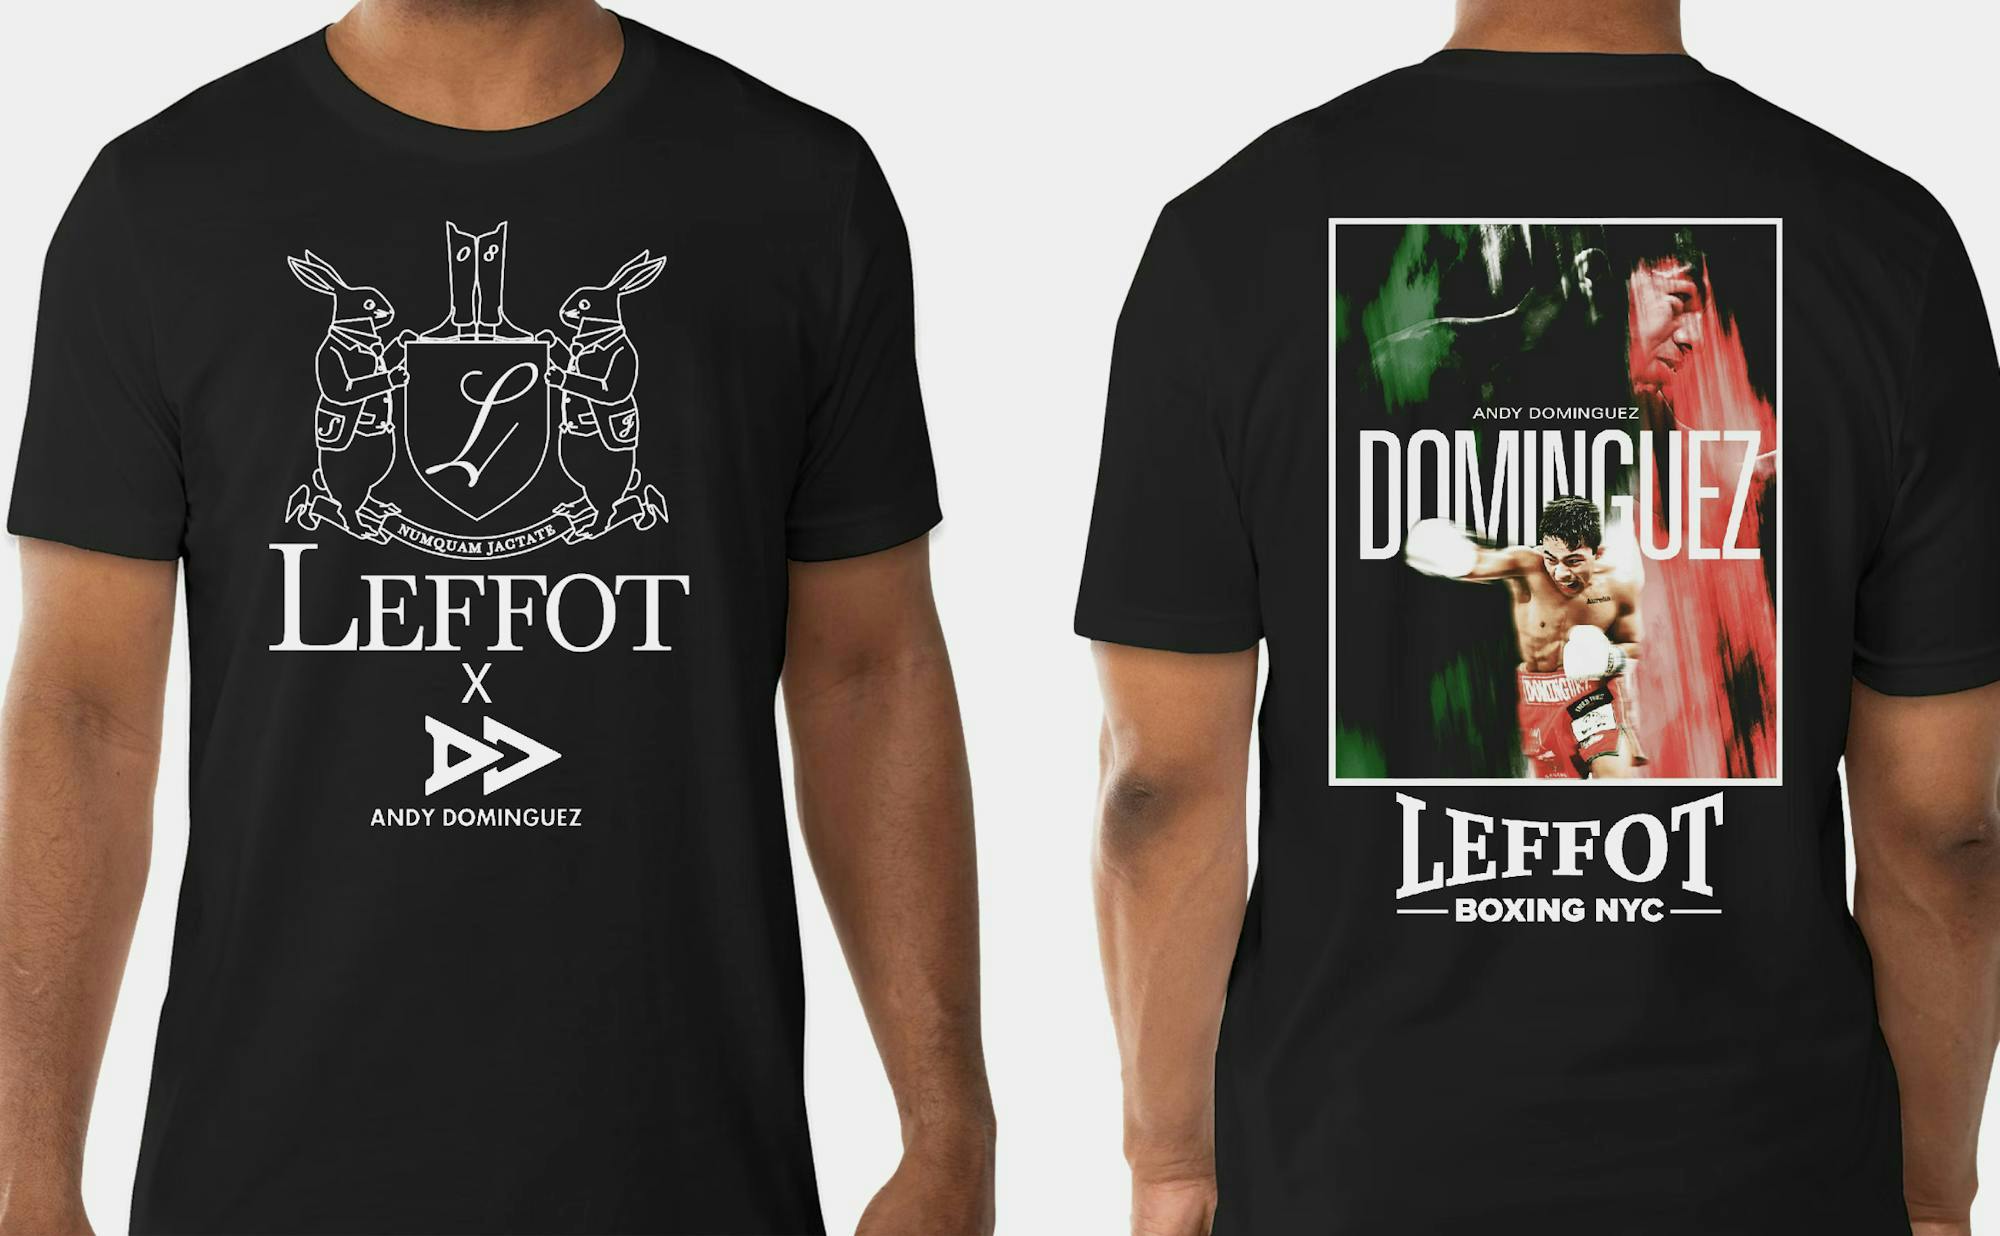 Front and back view of the Andy Dominguez fight t-shirt.